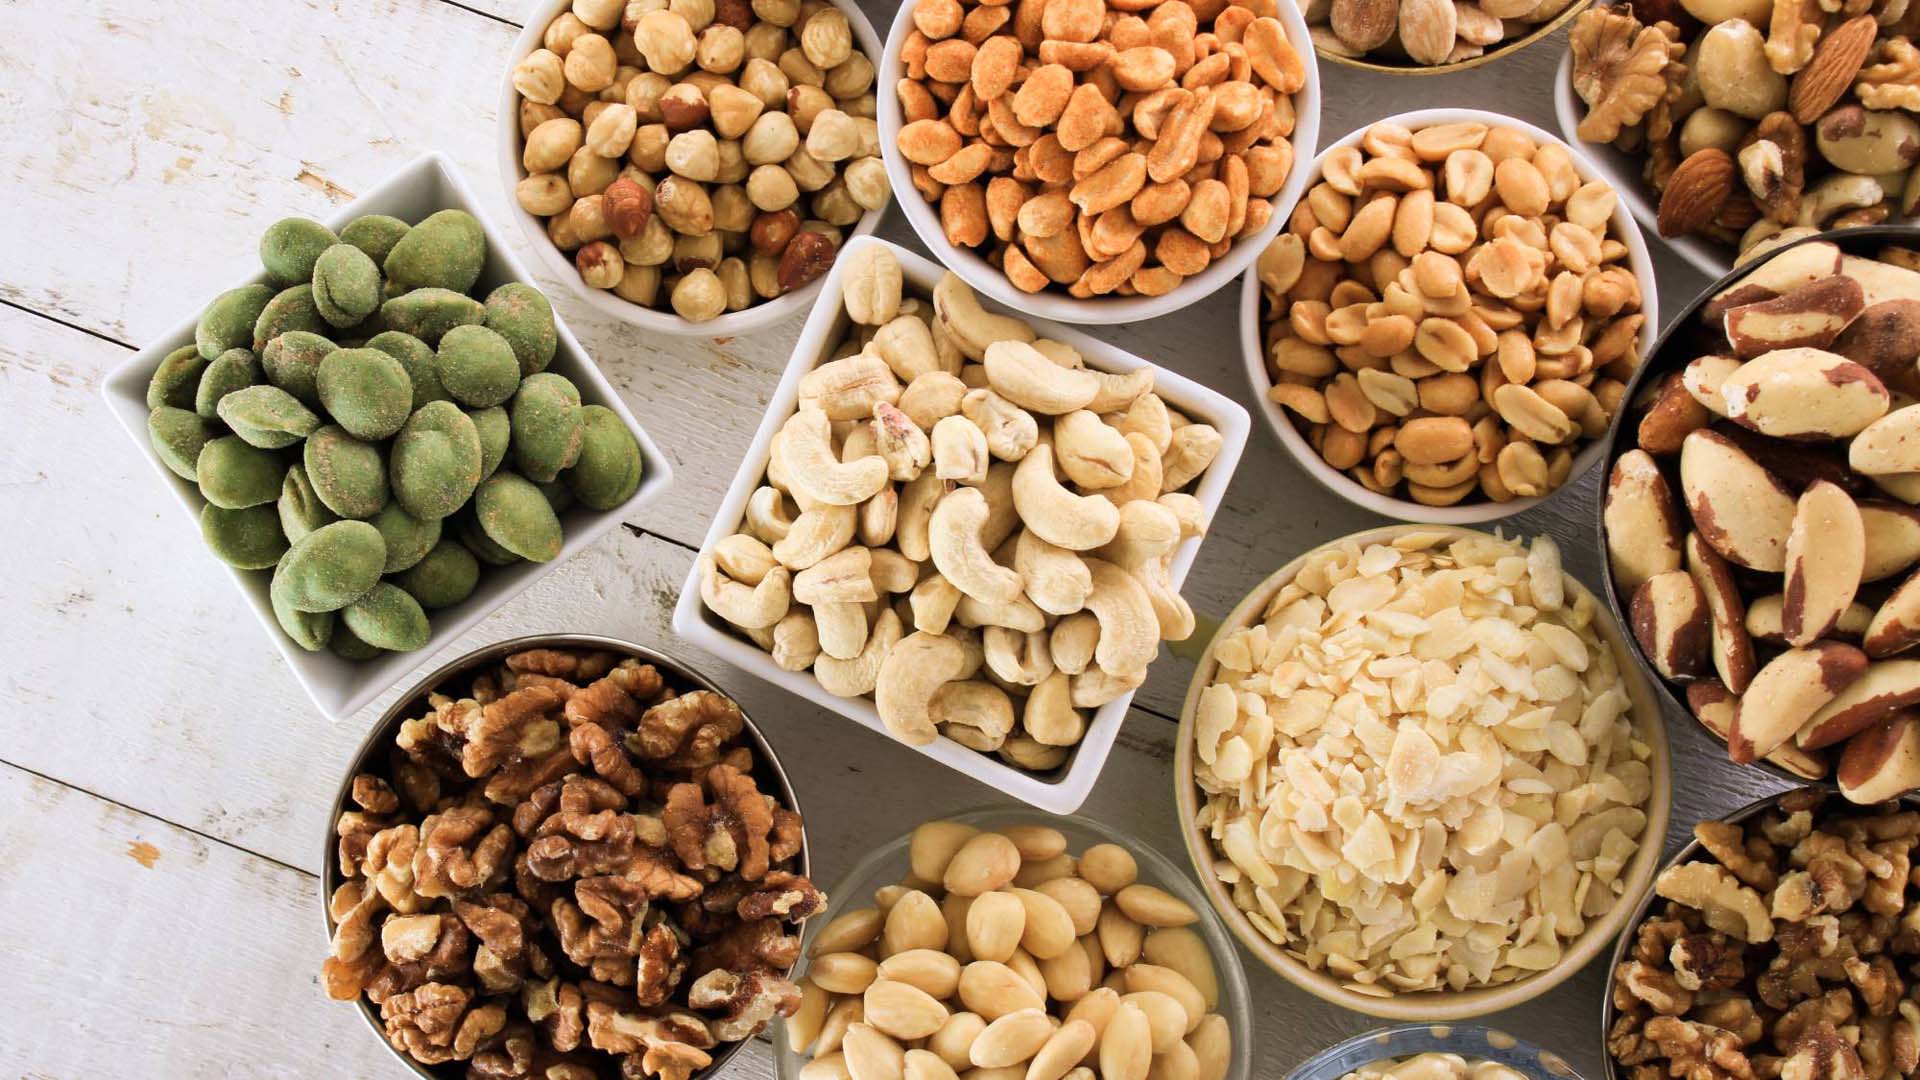 A selection of different nuts in bowls on a table